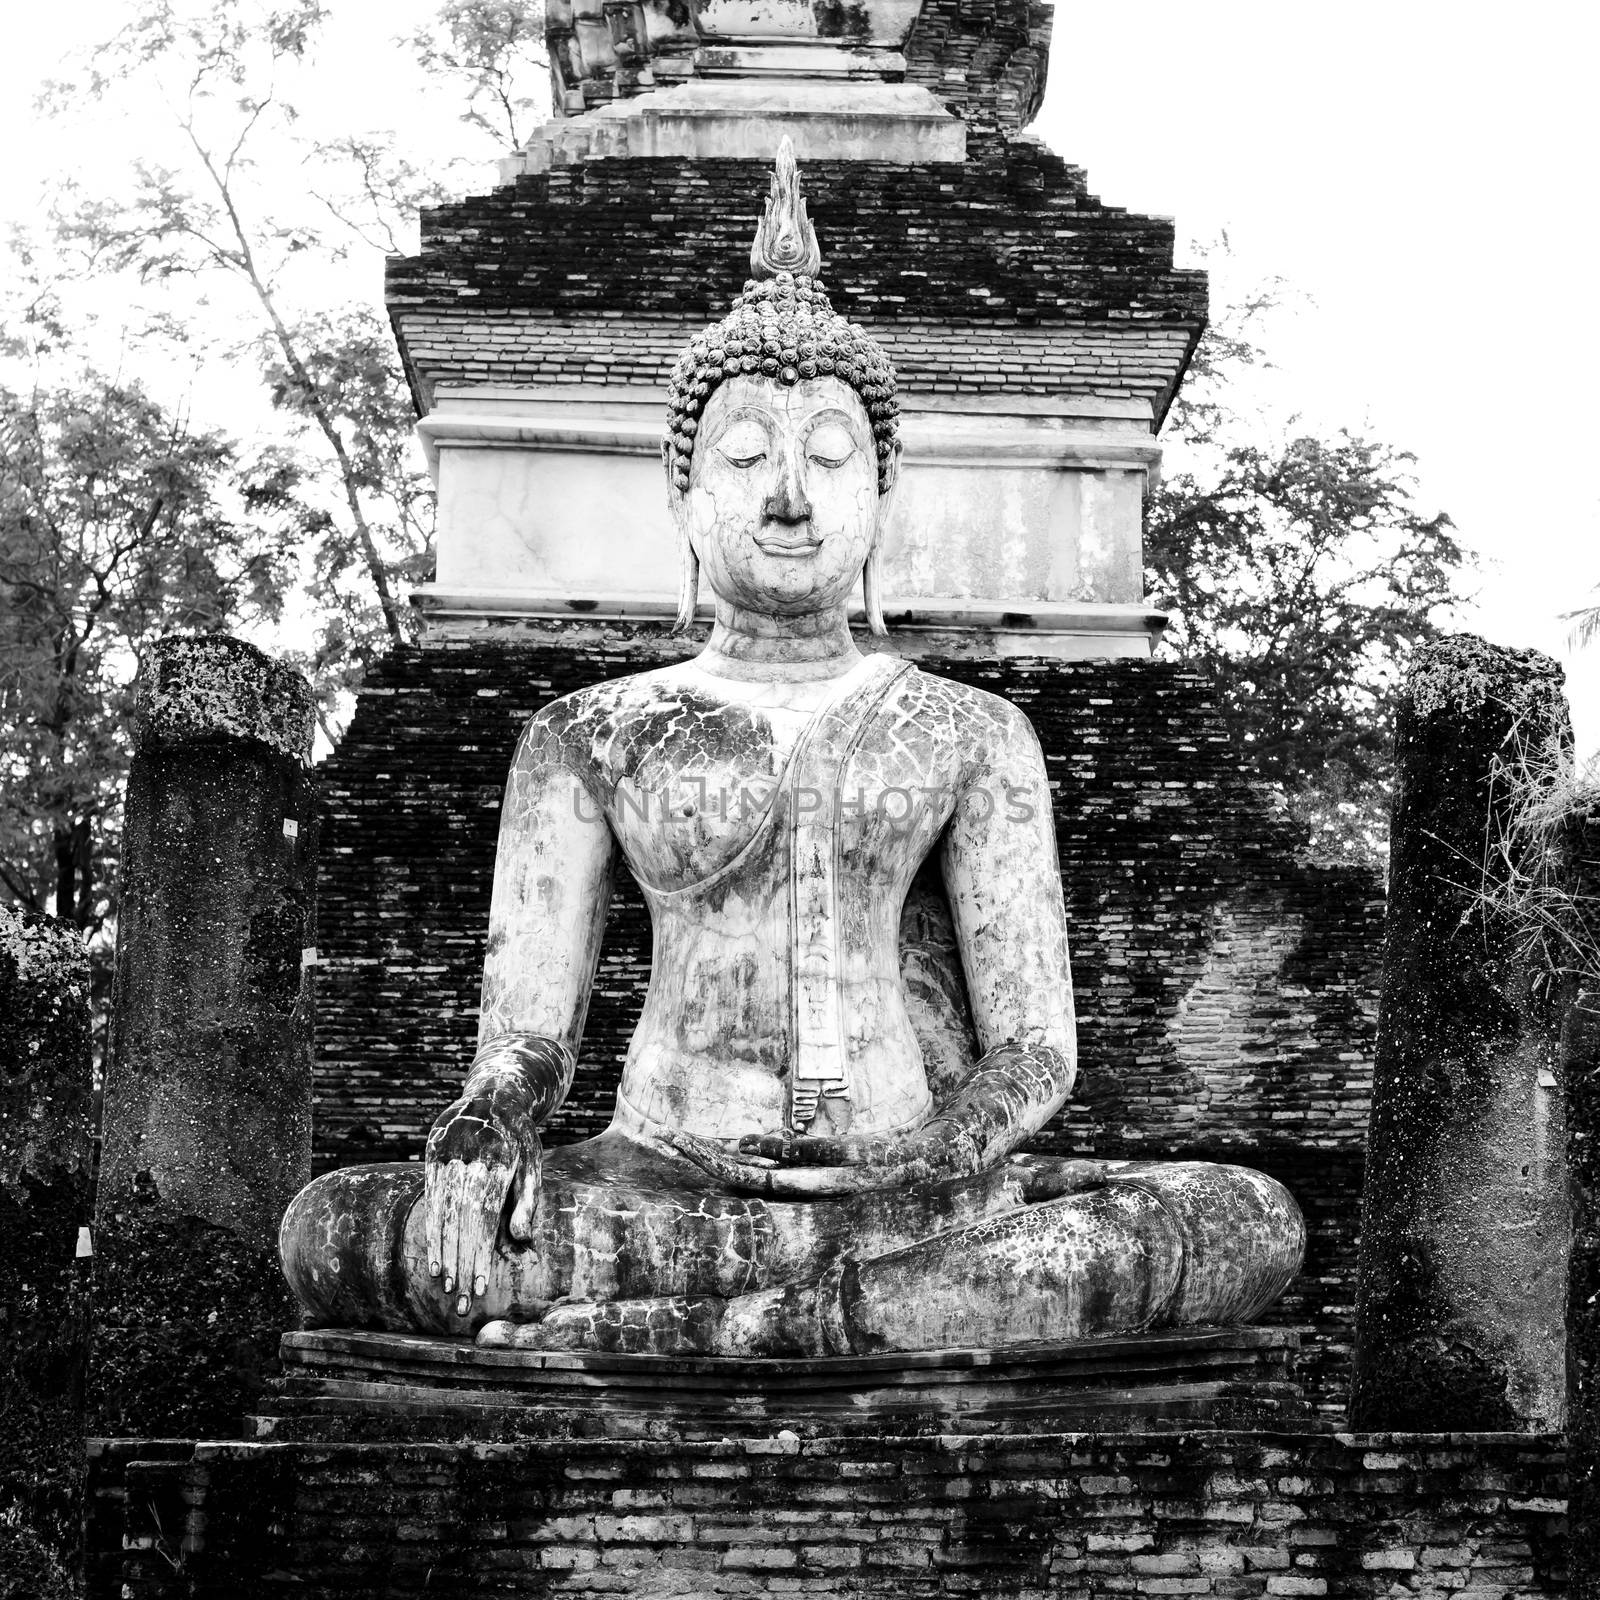 Buddha Statue in Wat Mahathat Temple in Sukhothai Historical park at sunrise, Thailand